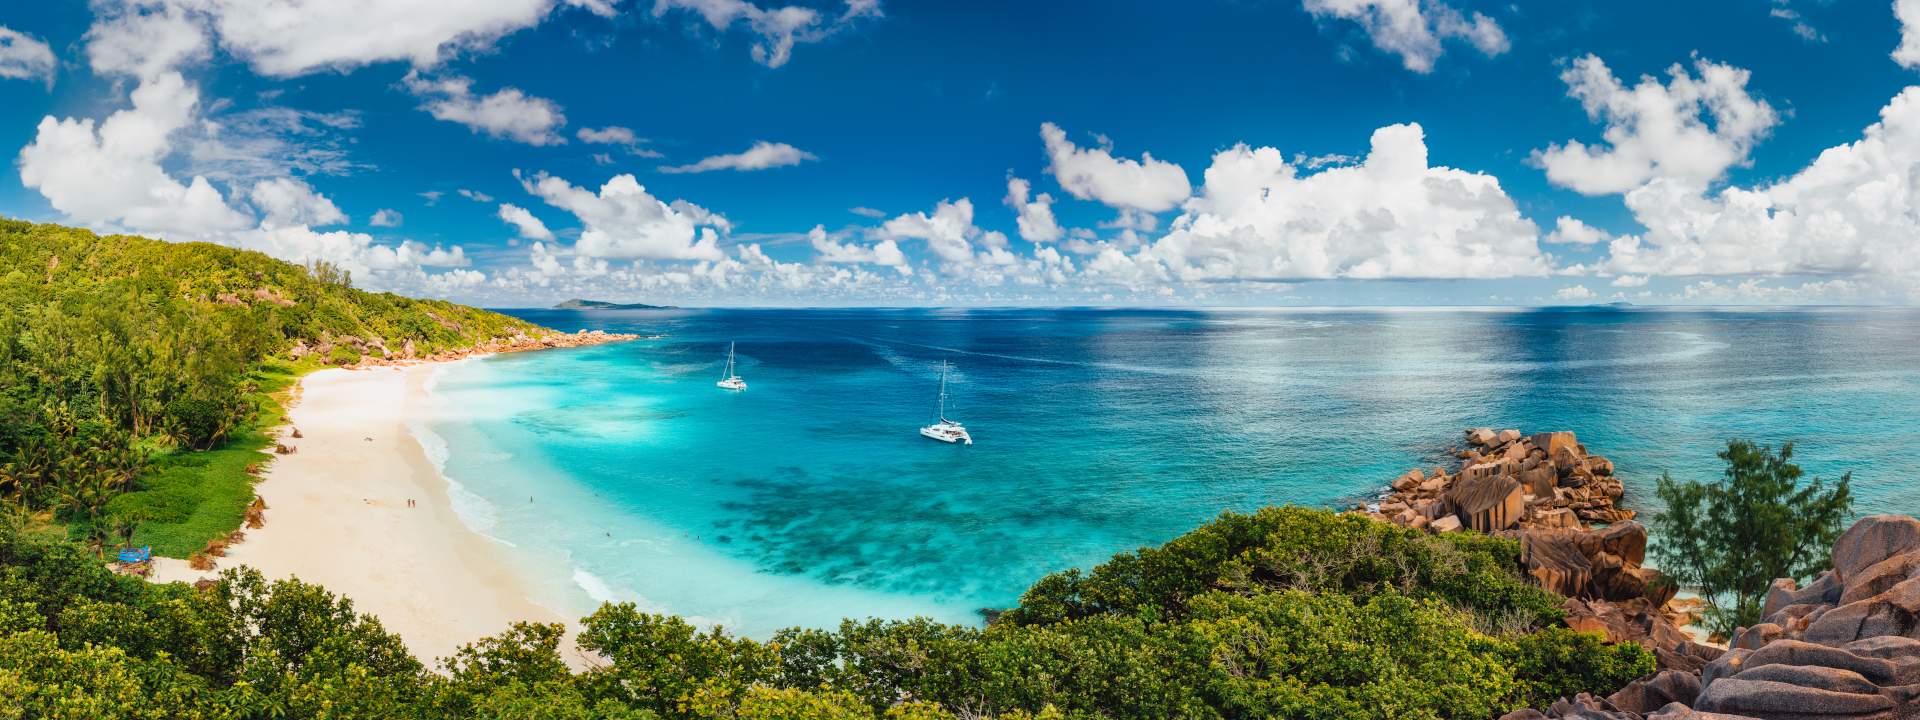 The Seychelles, one of the most beautiful archipelagos in the world